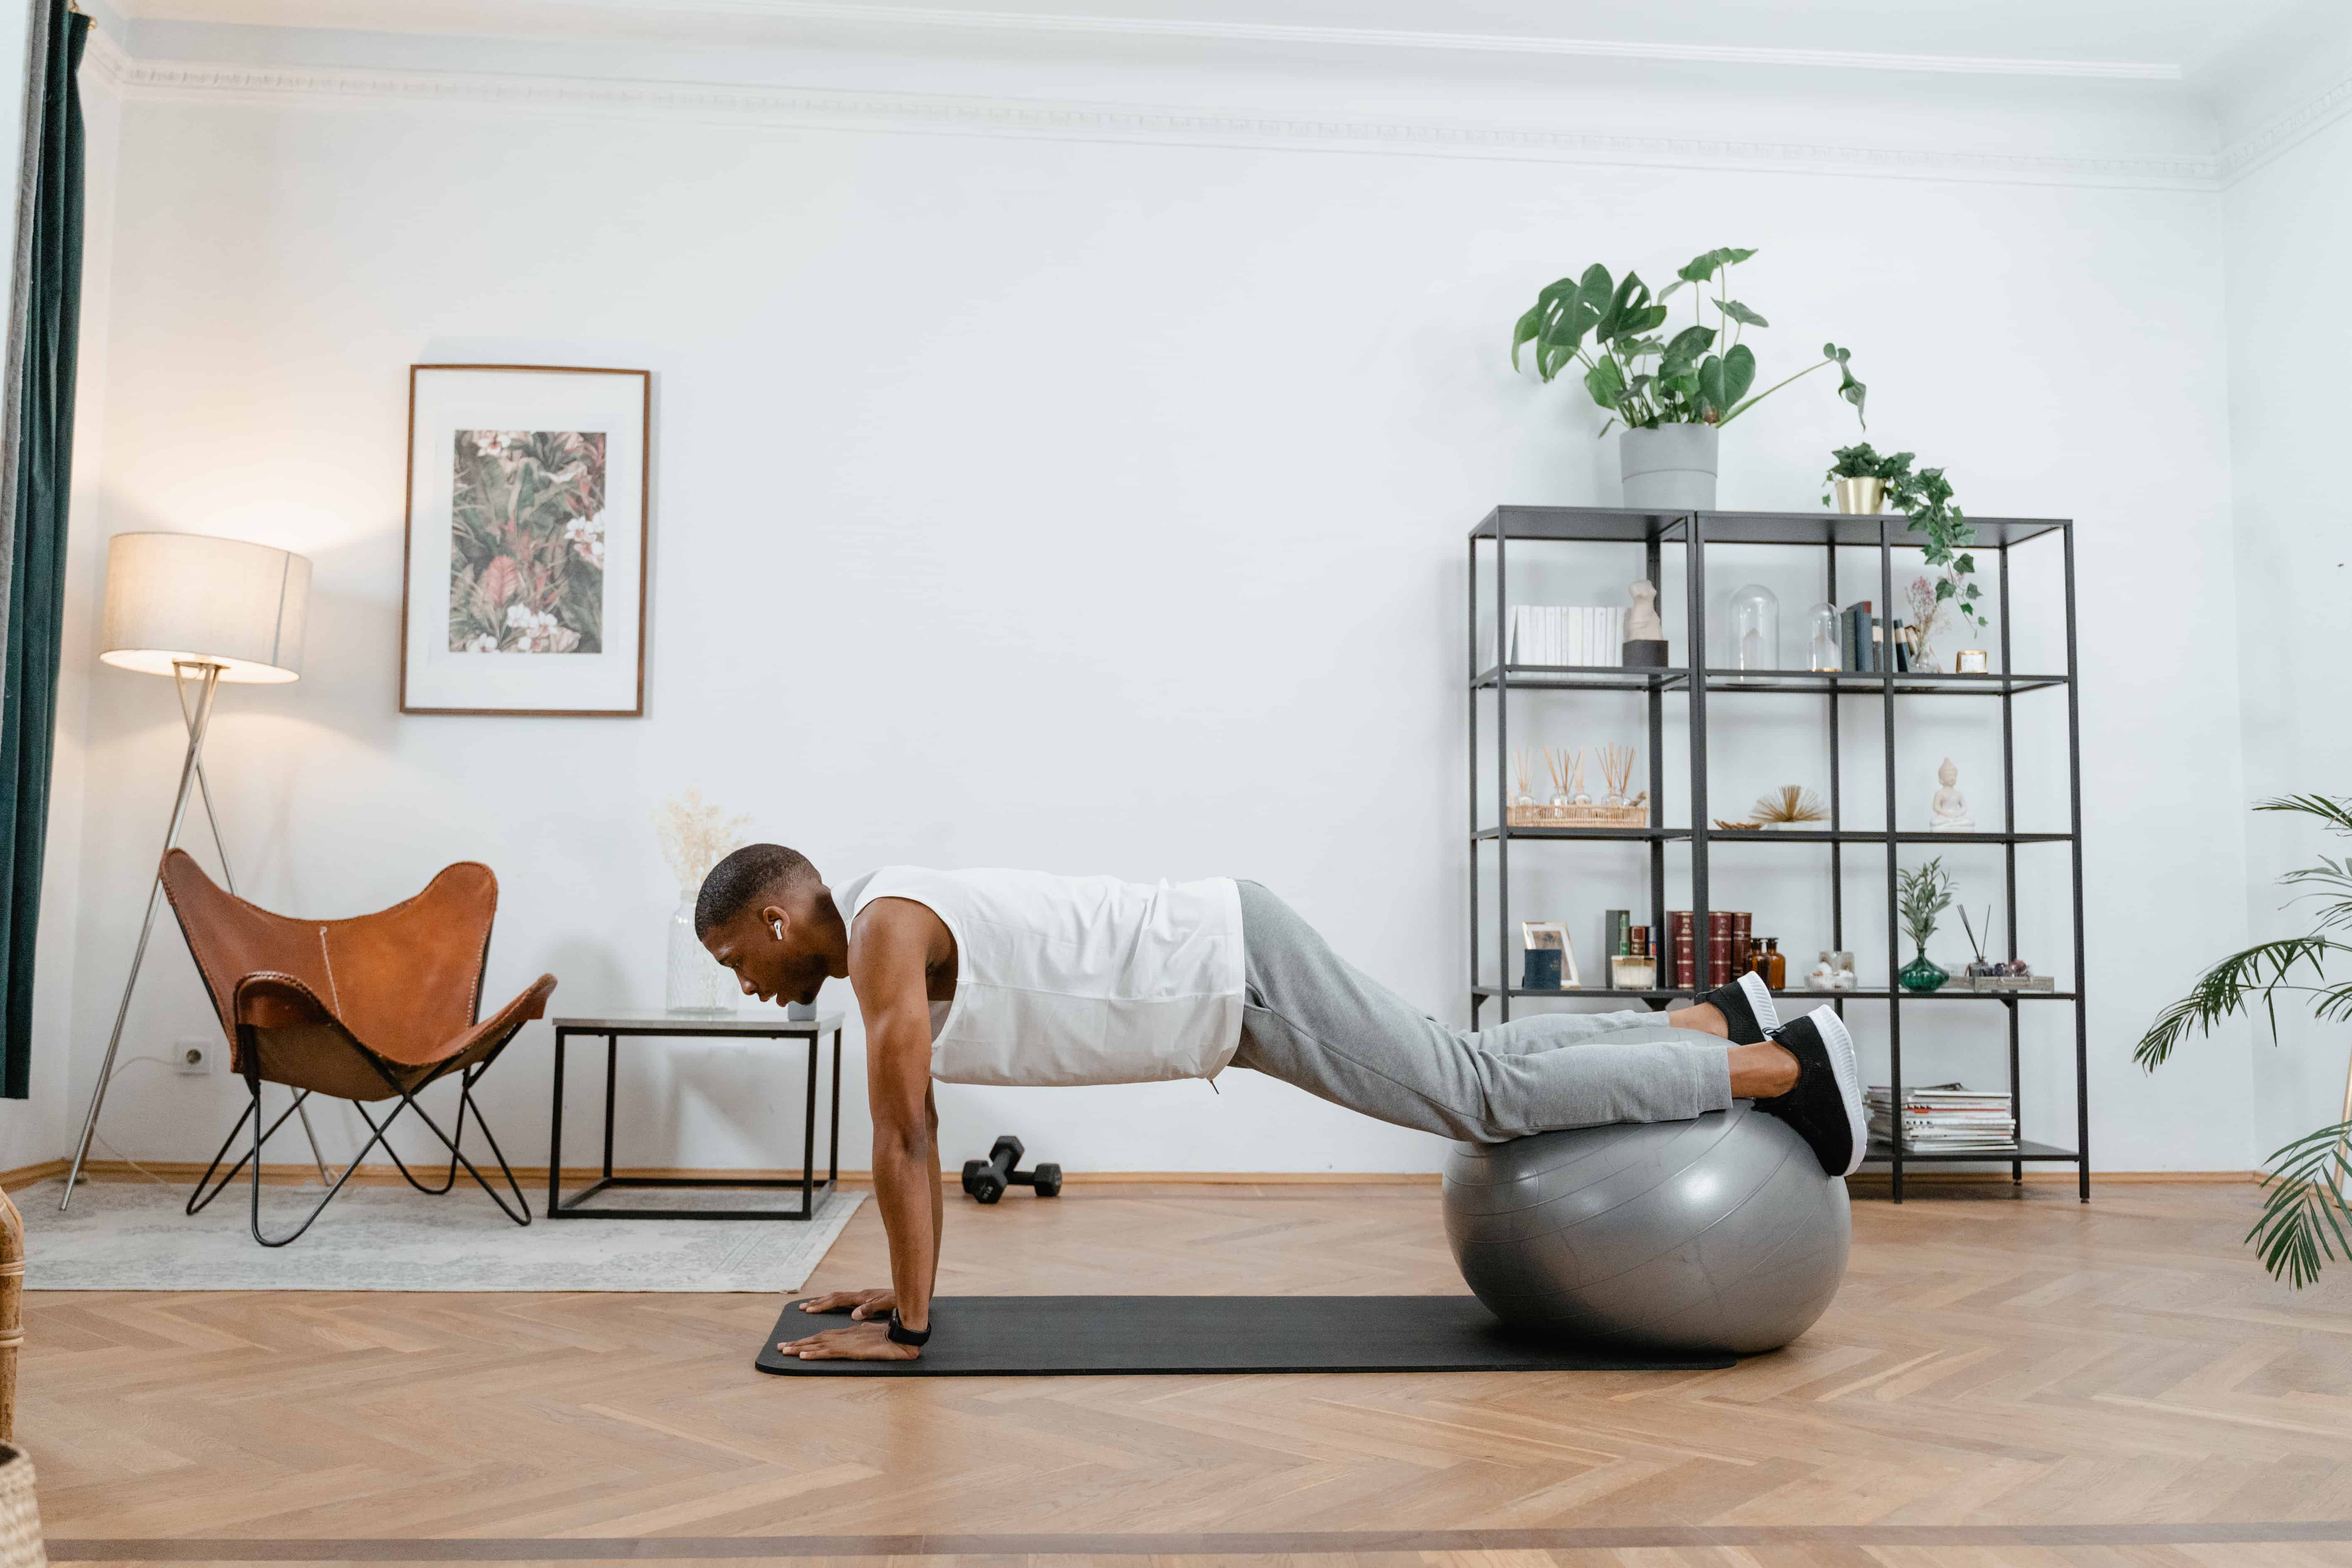 A man working out on a yoga ball